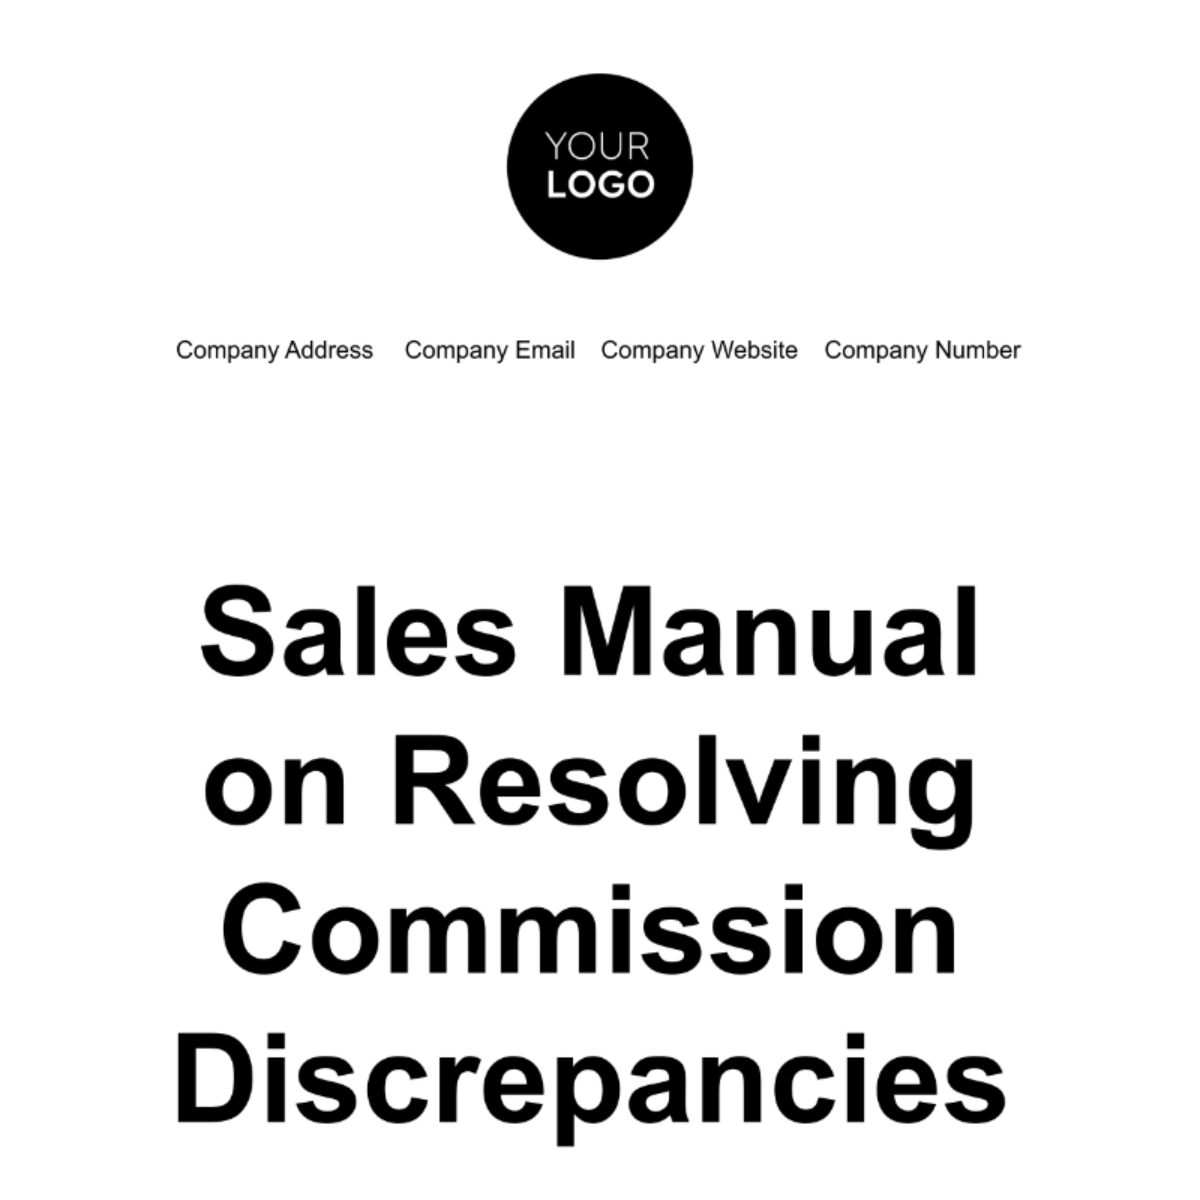 Free Sales Manual on Resolving Commission Discrepancies Template